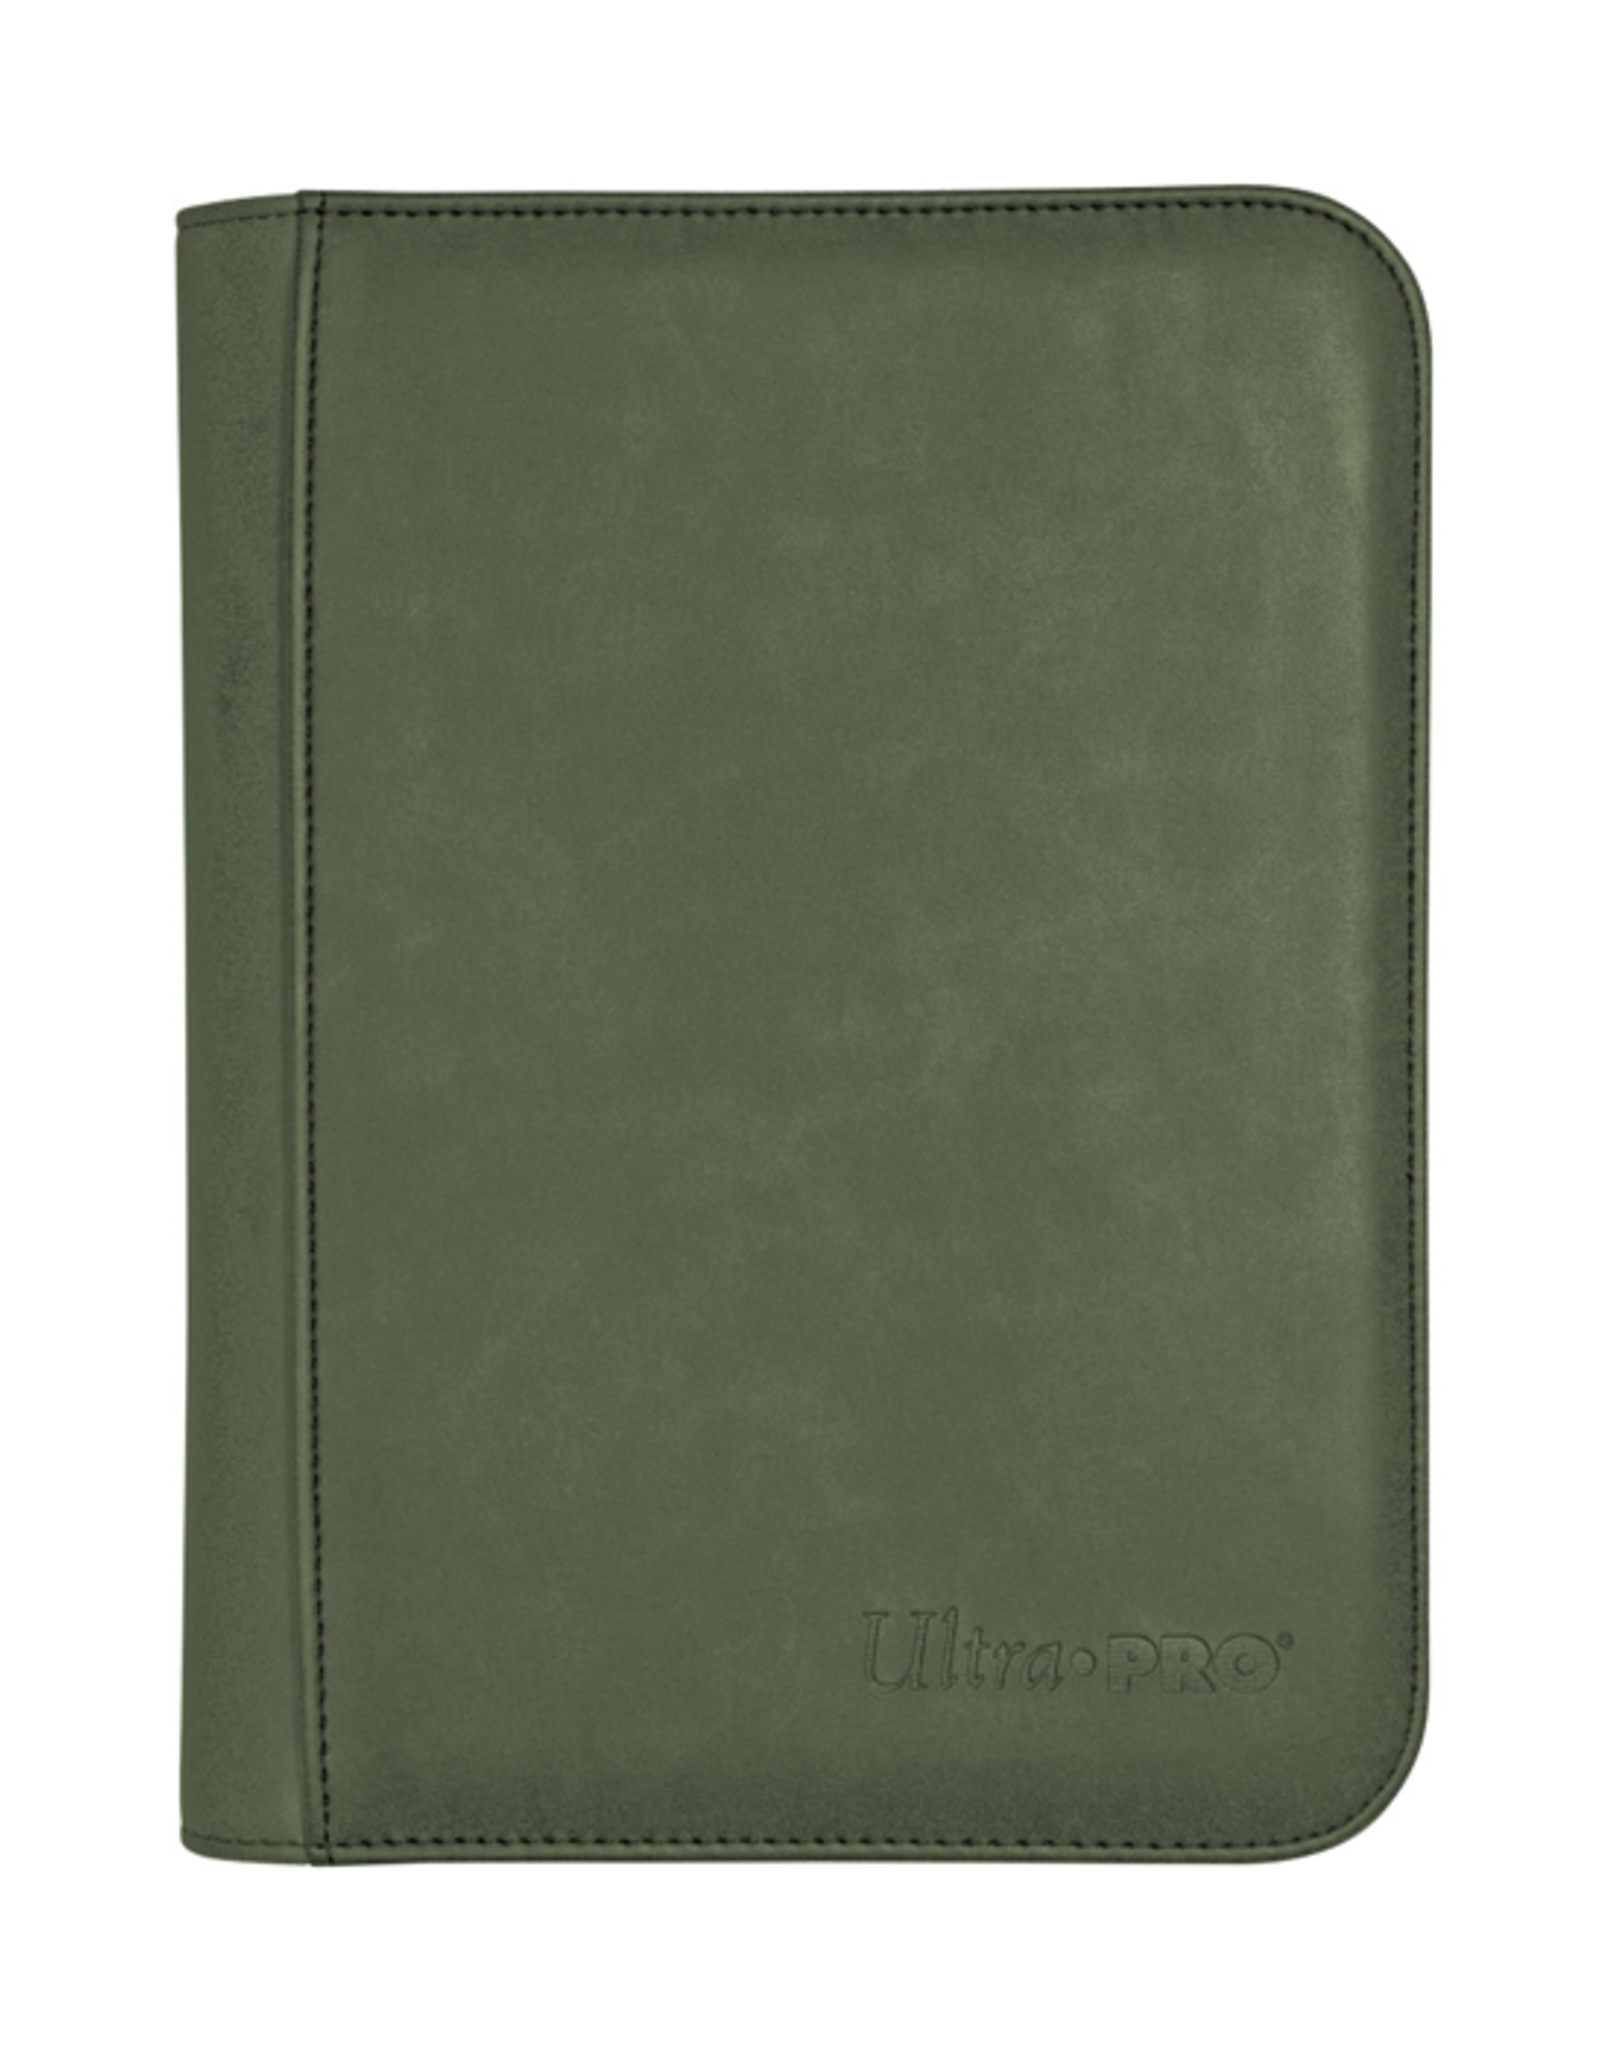 Ultra Pro Ultra Pro: PRO-Binder - Premium - 4-Pocket - Zippered - Suede Collection - Emerald